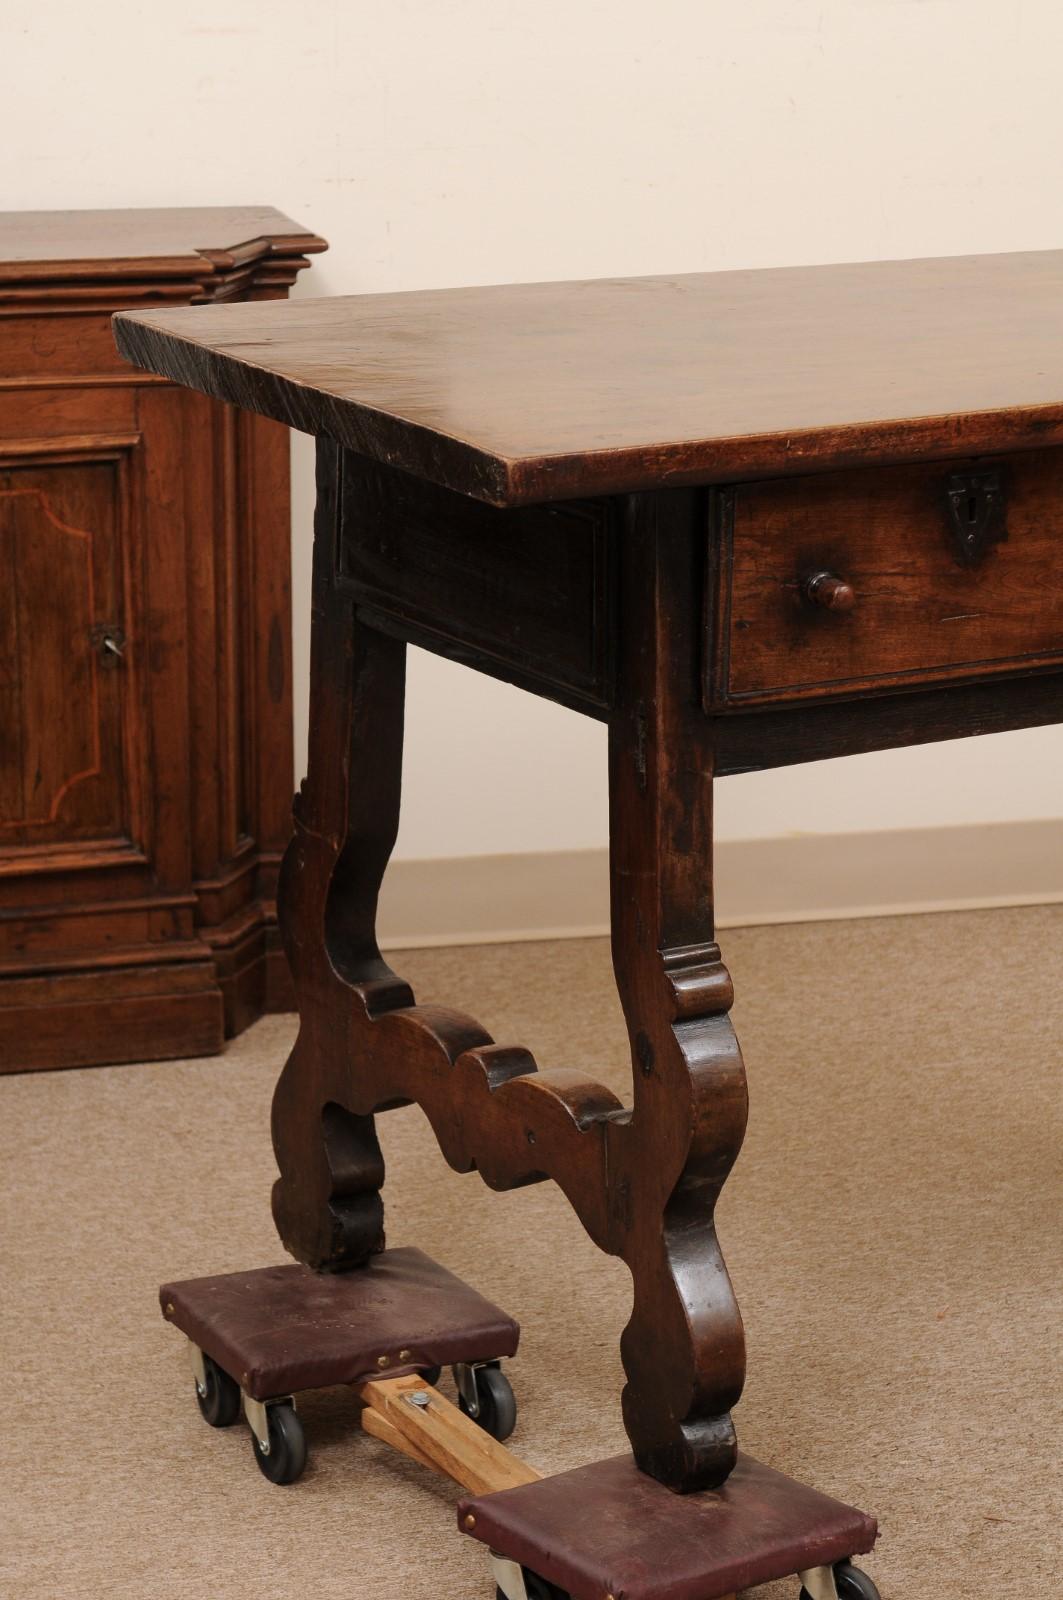 Spanish Walnut Console Table with 2 Drawers and Lyre Legs, Early 18th Century For Sale 1